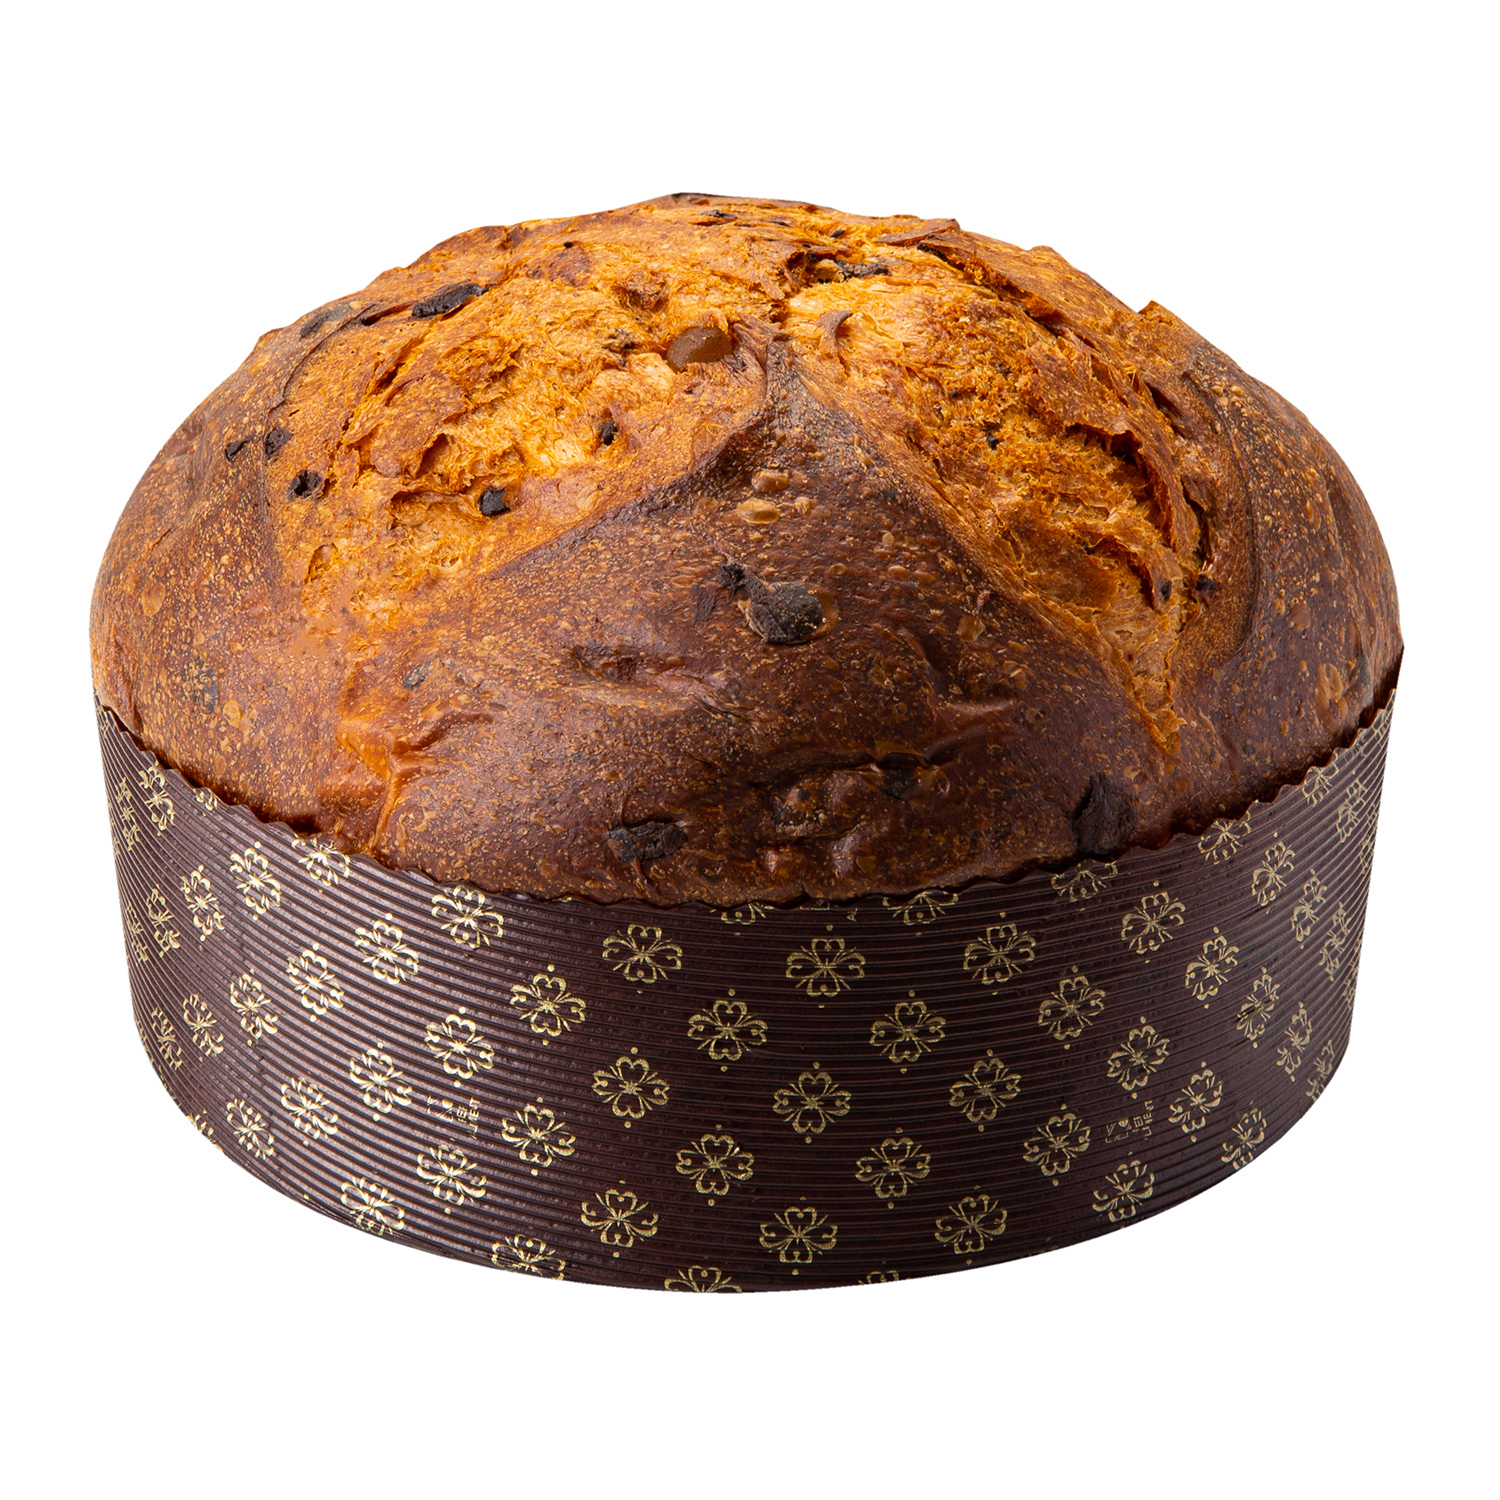 Citrus, Ginger and Chocolate Panettone Baked goods